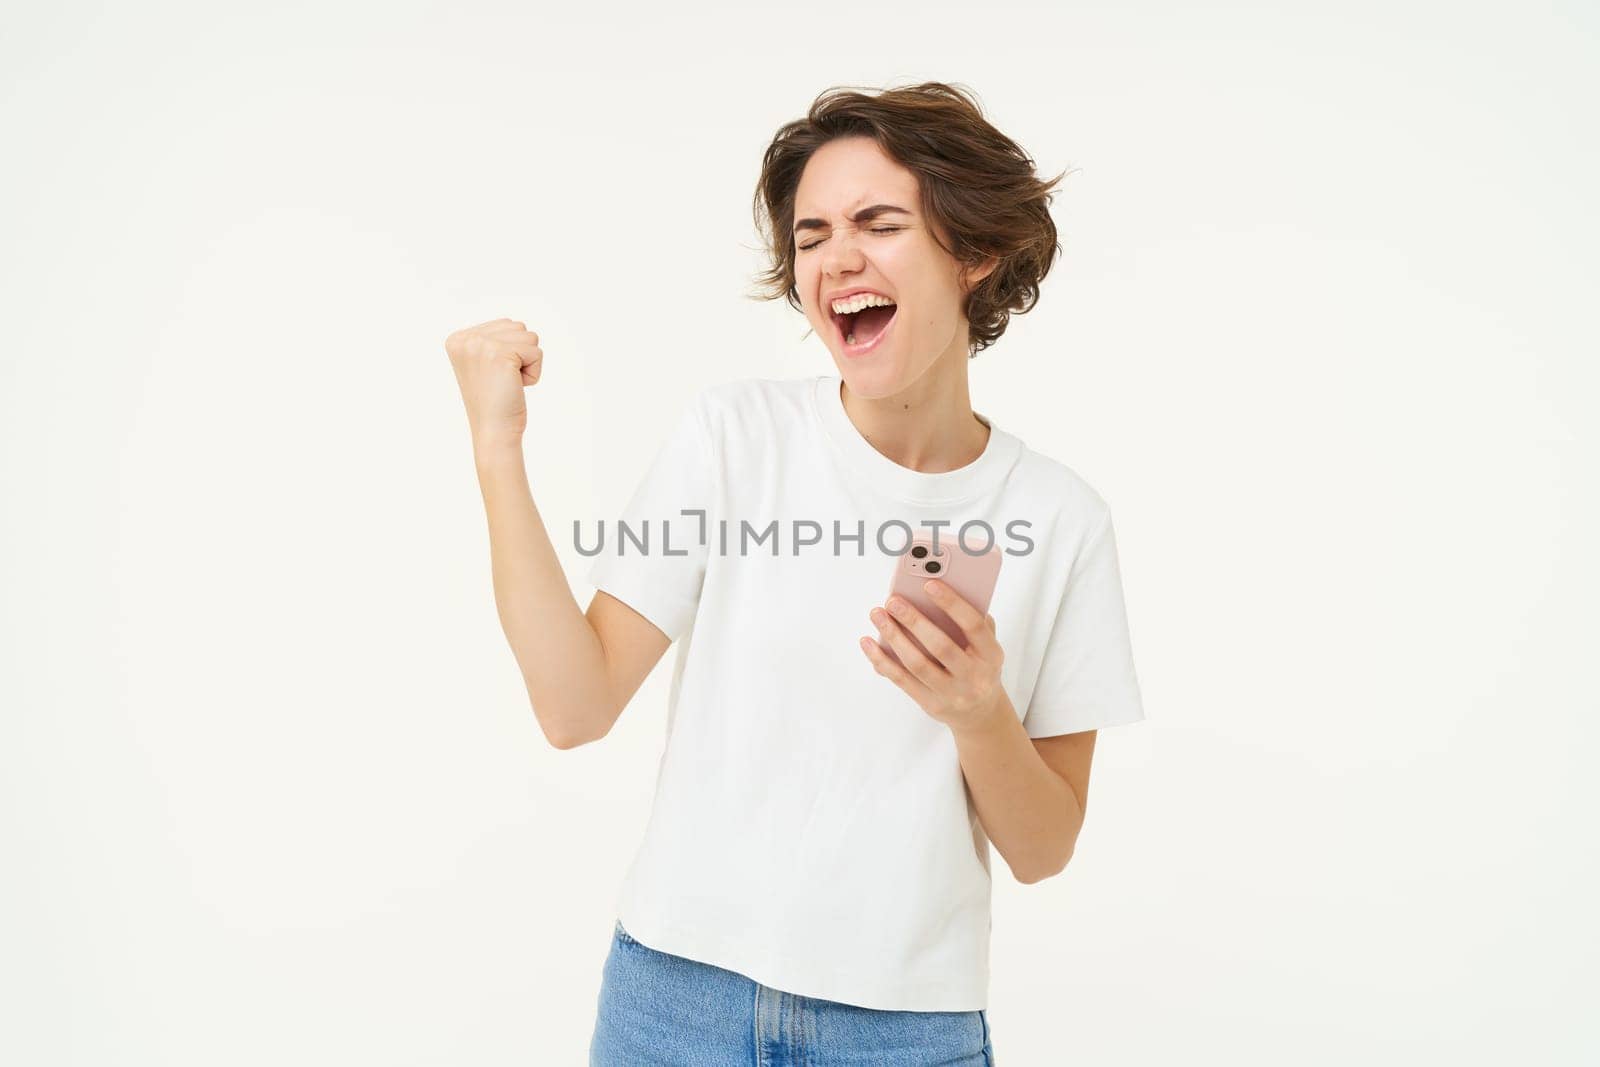 Portrait of brunette woman holding mobile phone, winning, triumphing after completing achievement on smartphone app, standing over white background.